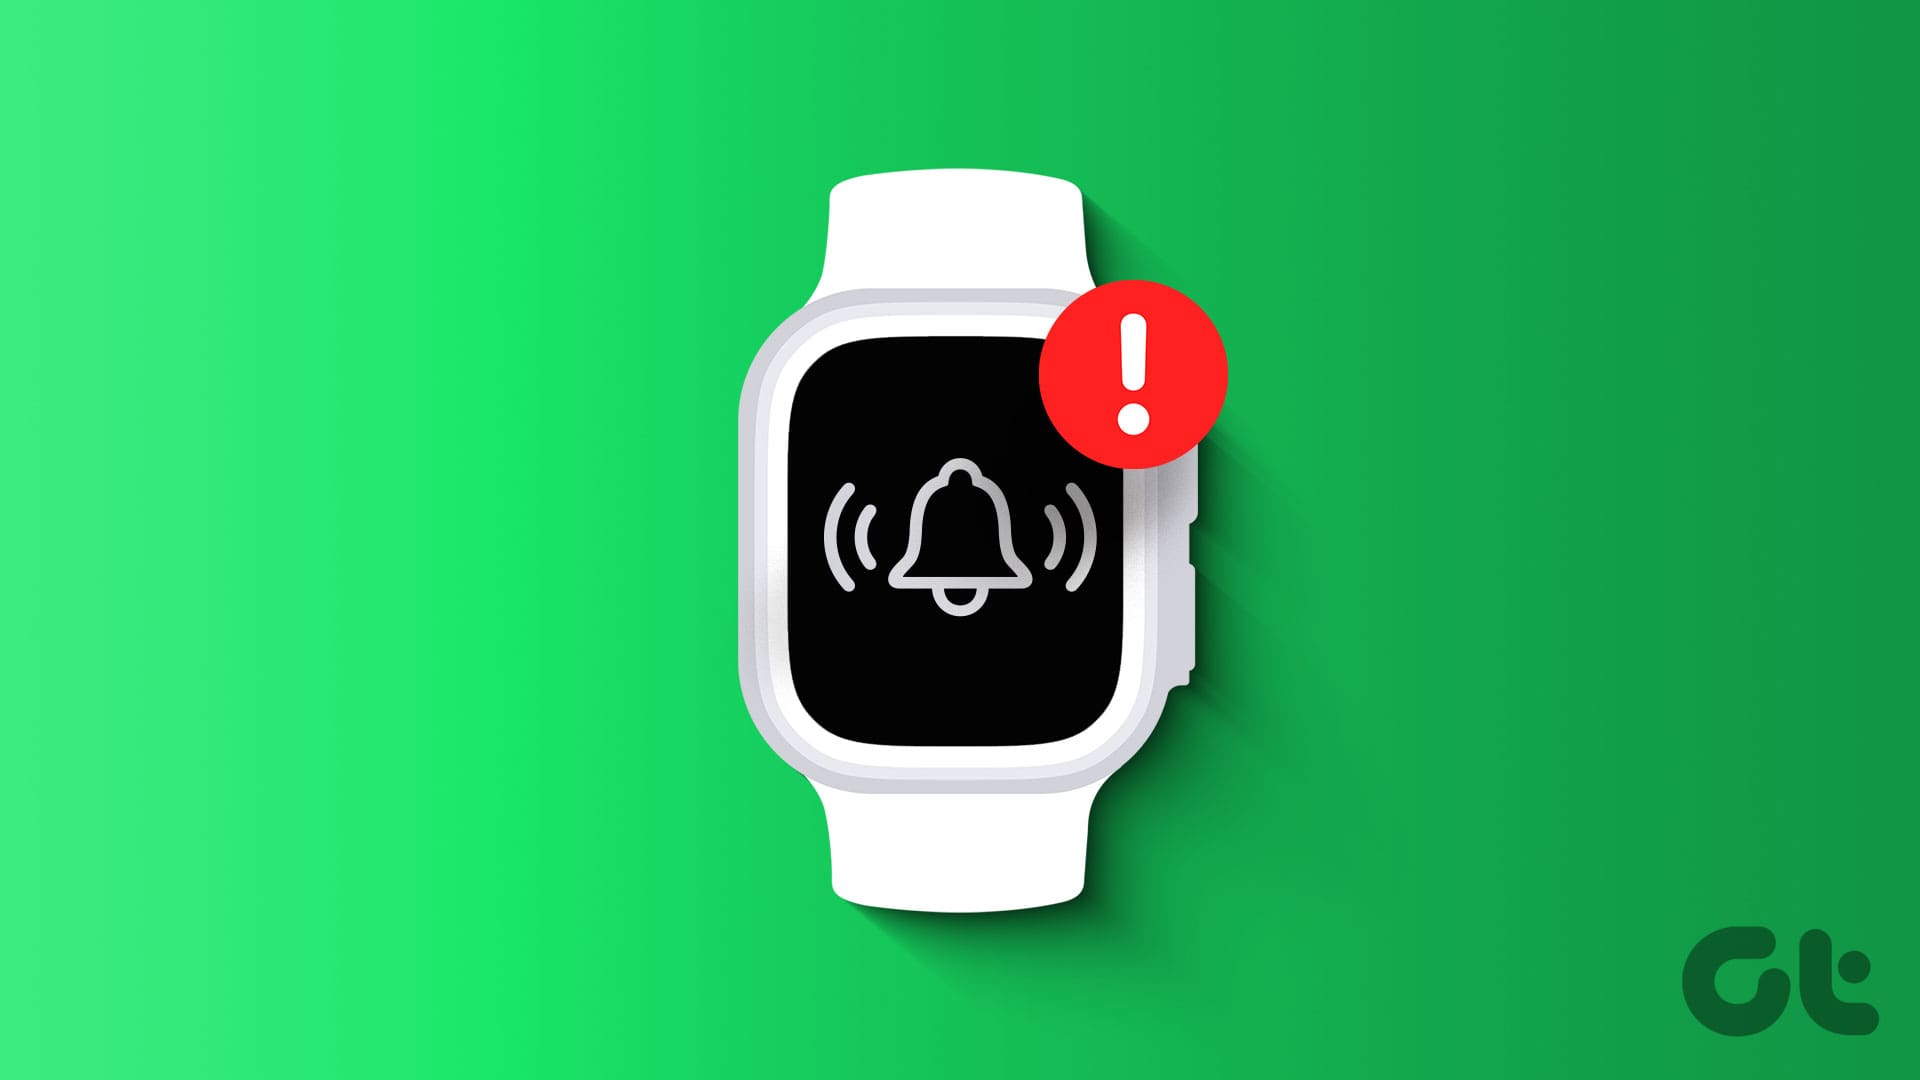 Apple Watch Not Showing or Getting Notifications